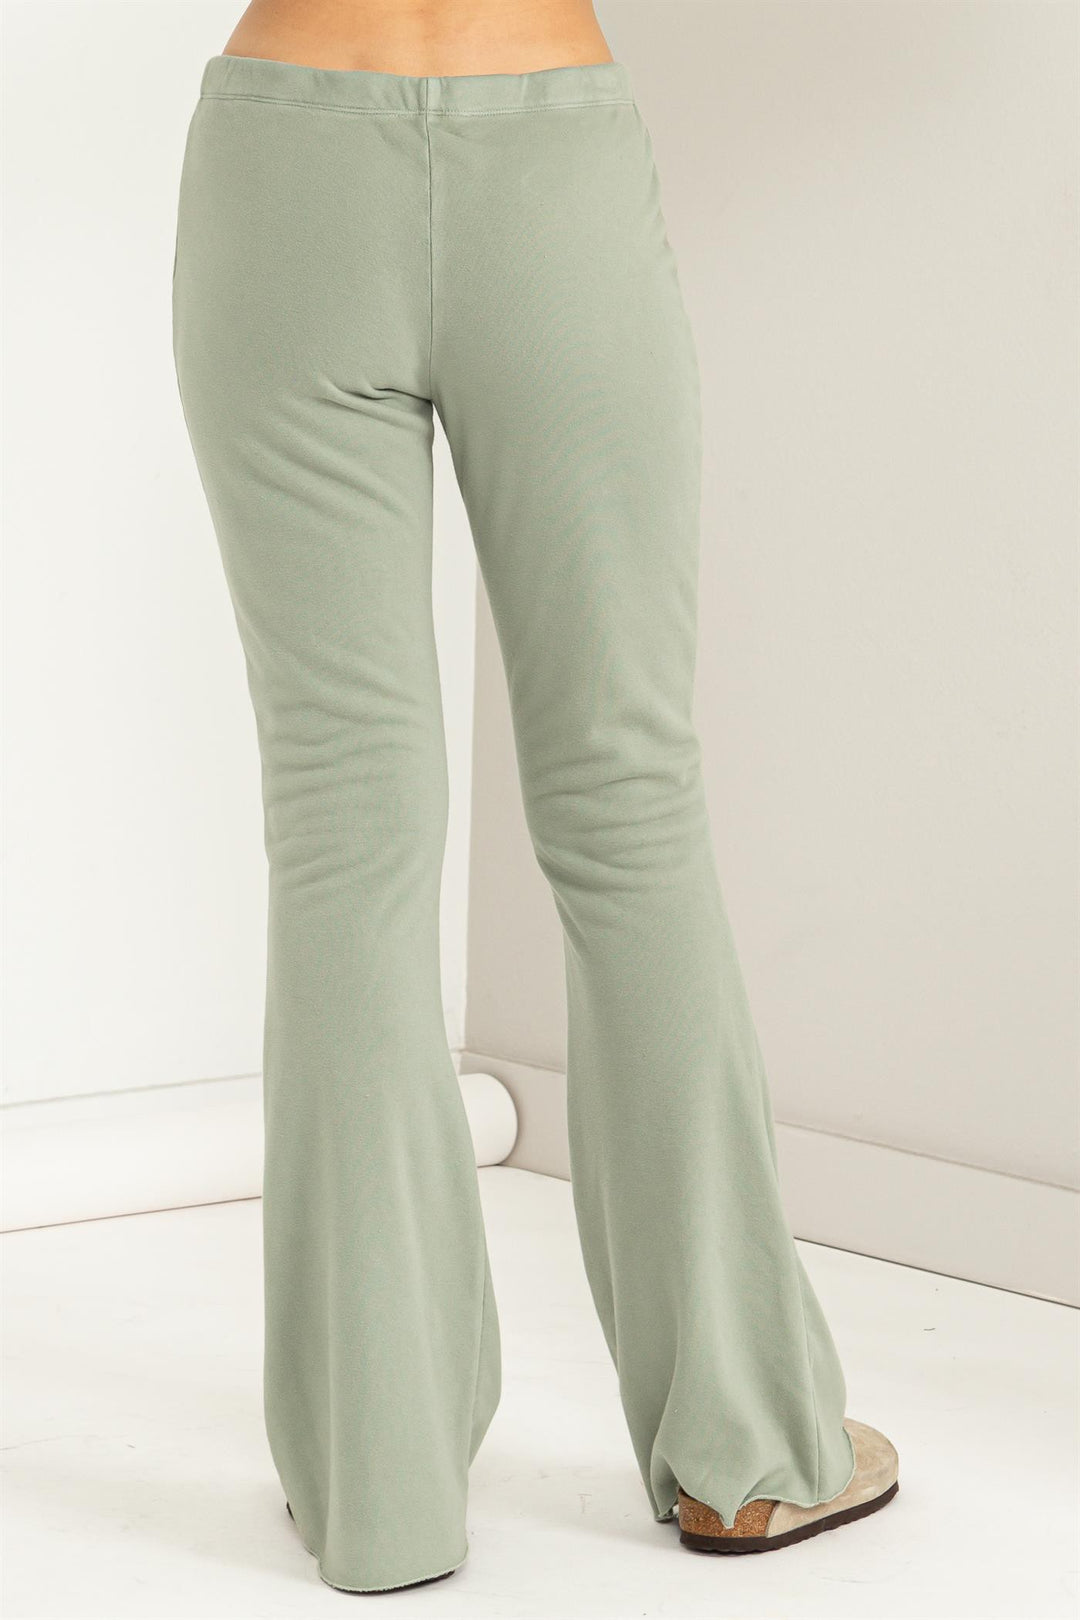 WILD SOUL MID-RISE FLARE PANT